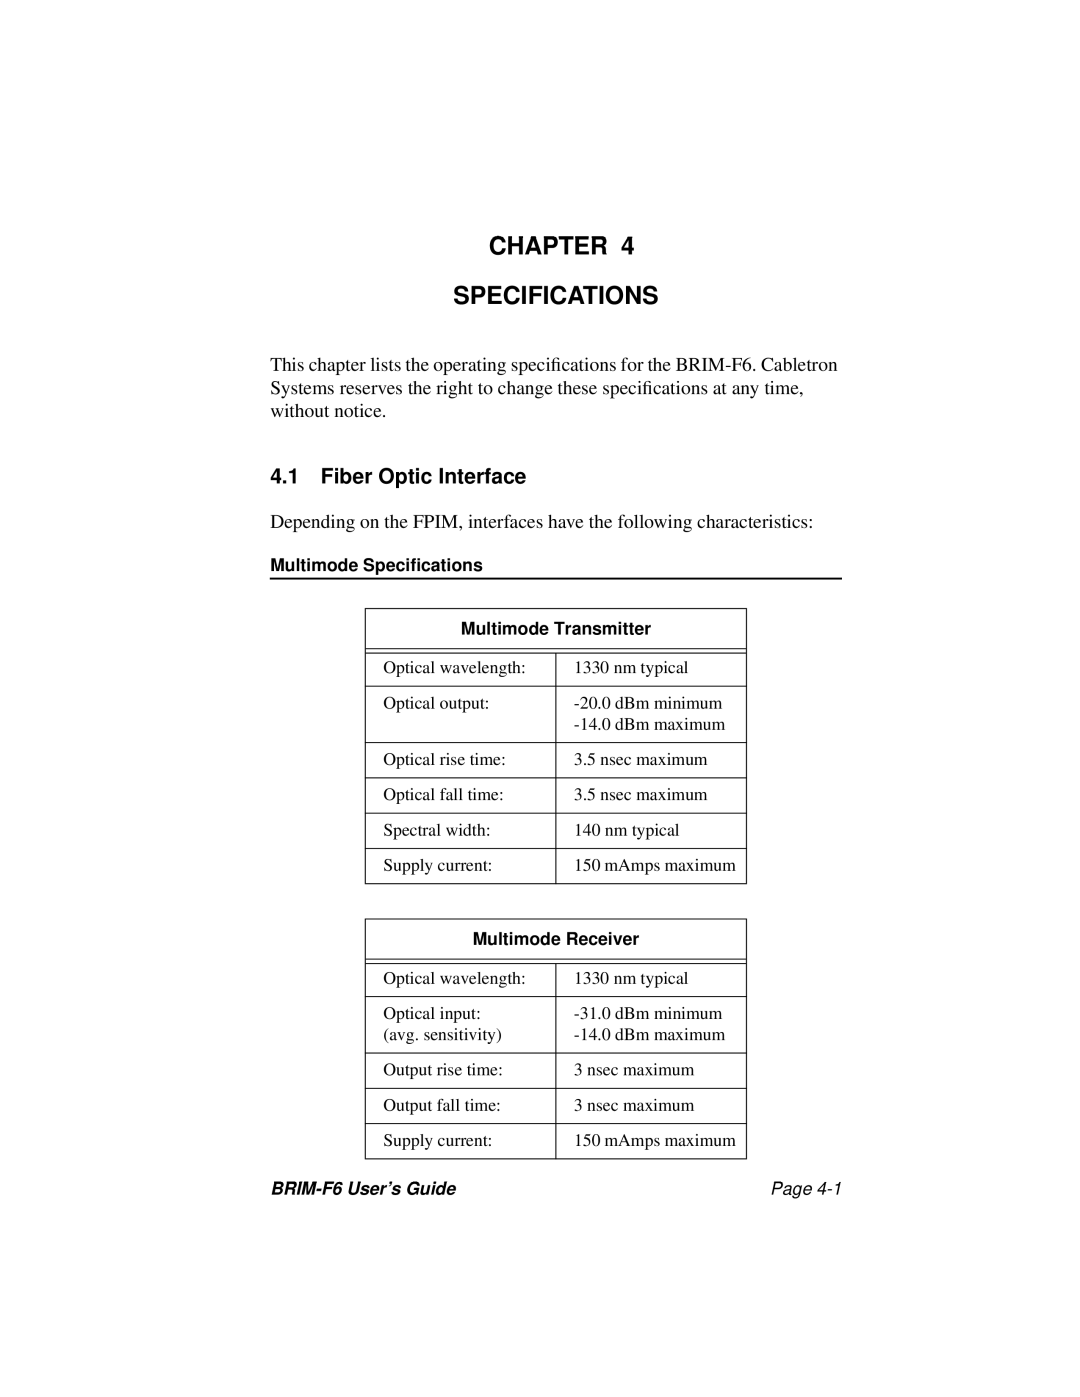 Cabletron Systems BRIM-F6 manual Chapter Specifications, Fiber Optic Interface 